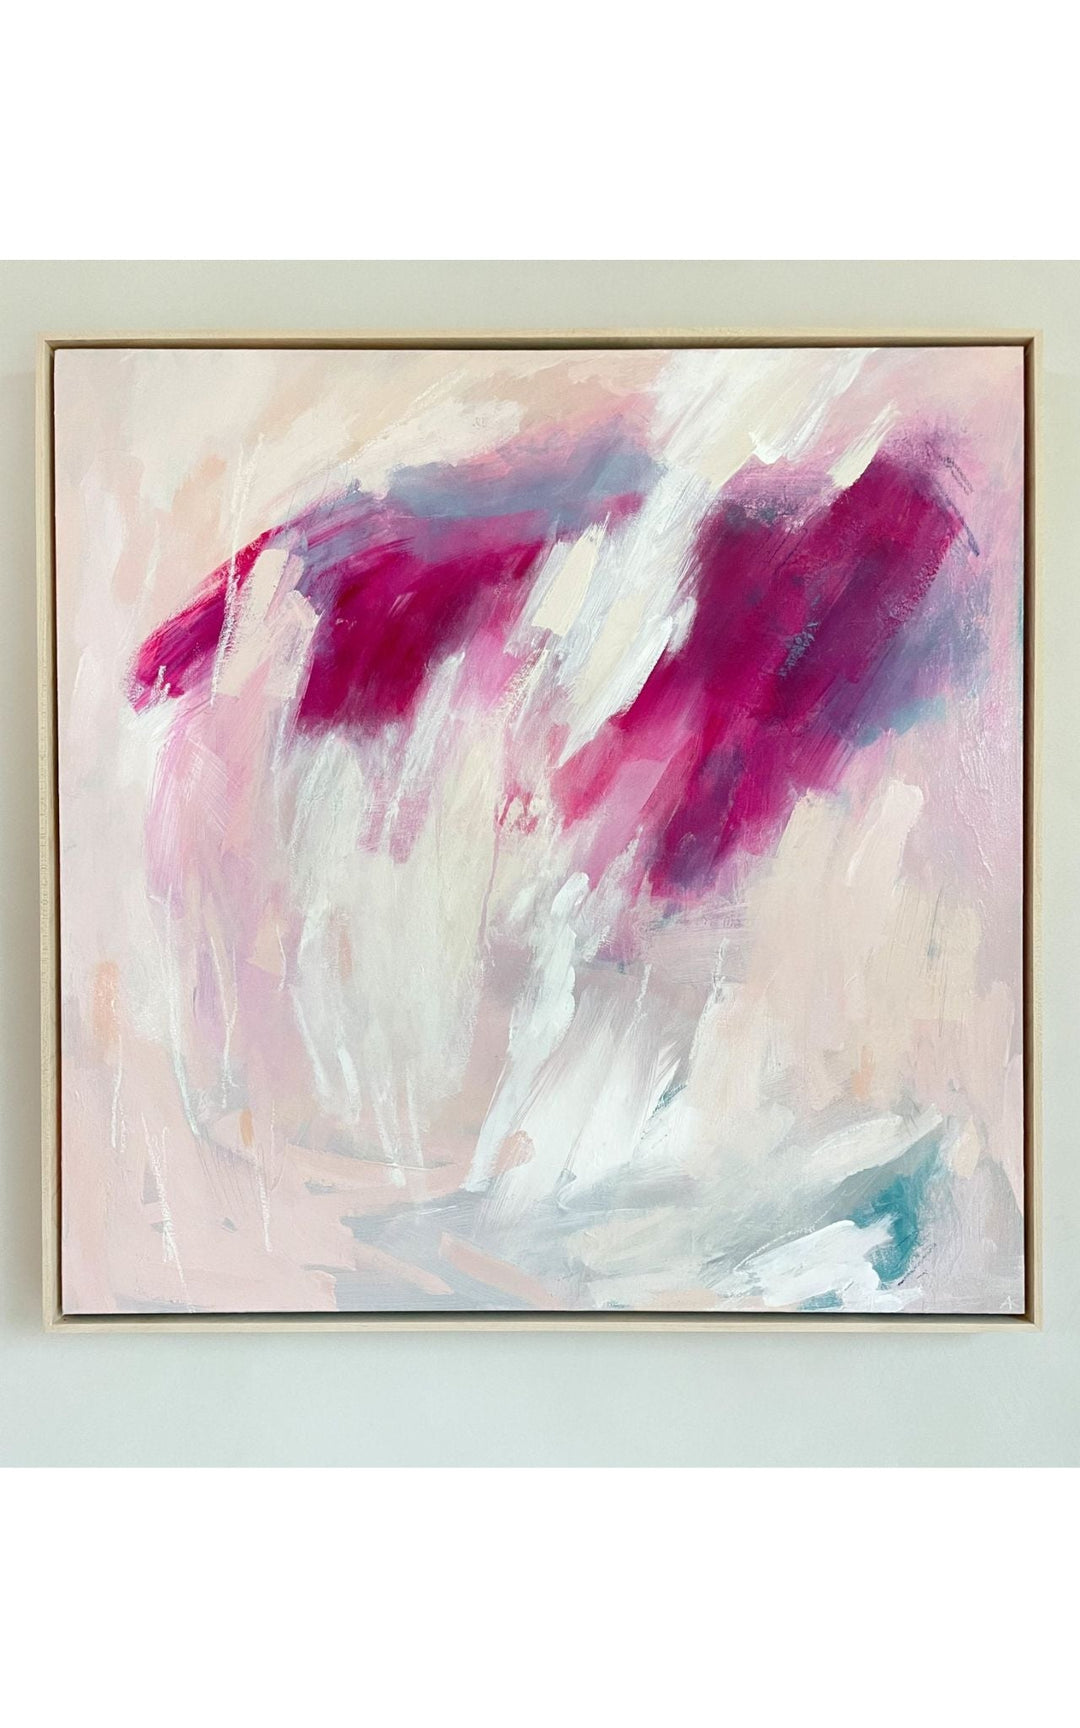 Abstract expressionist artwork with magenta hues against a light colored background.